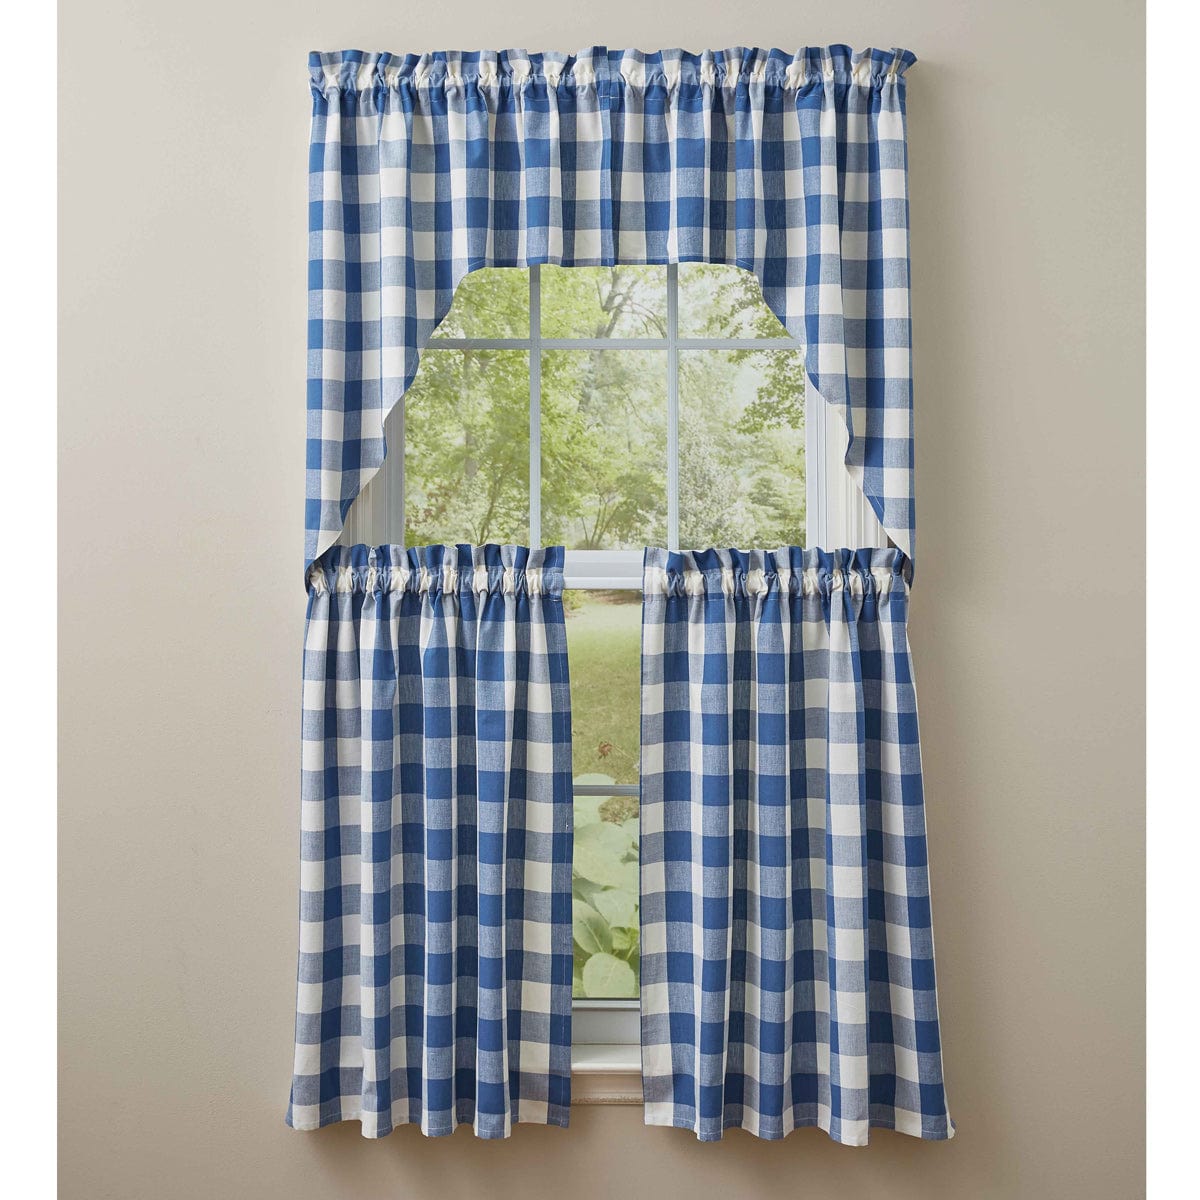 Wicklow Check in China Blue Swag Pair 36" Long Unlined-Park Designs-The Village Merchant